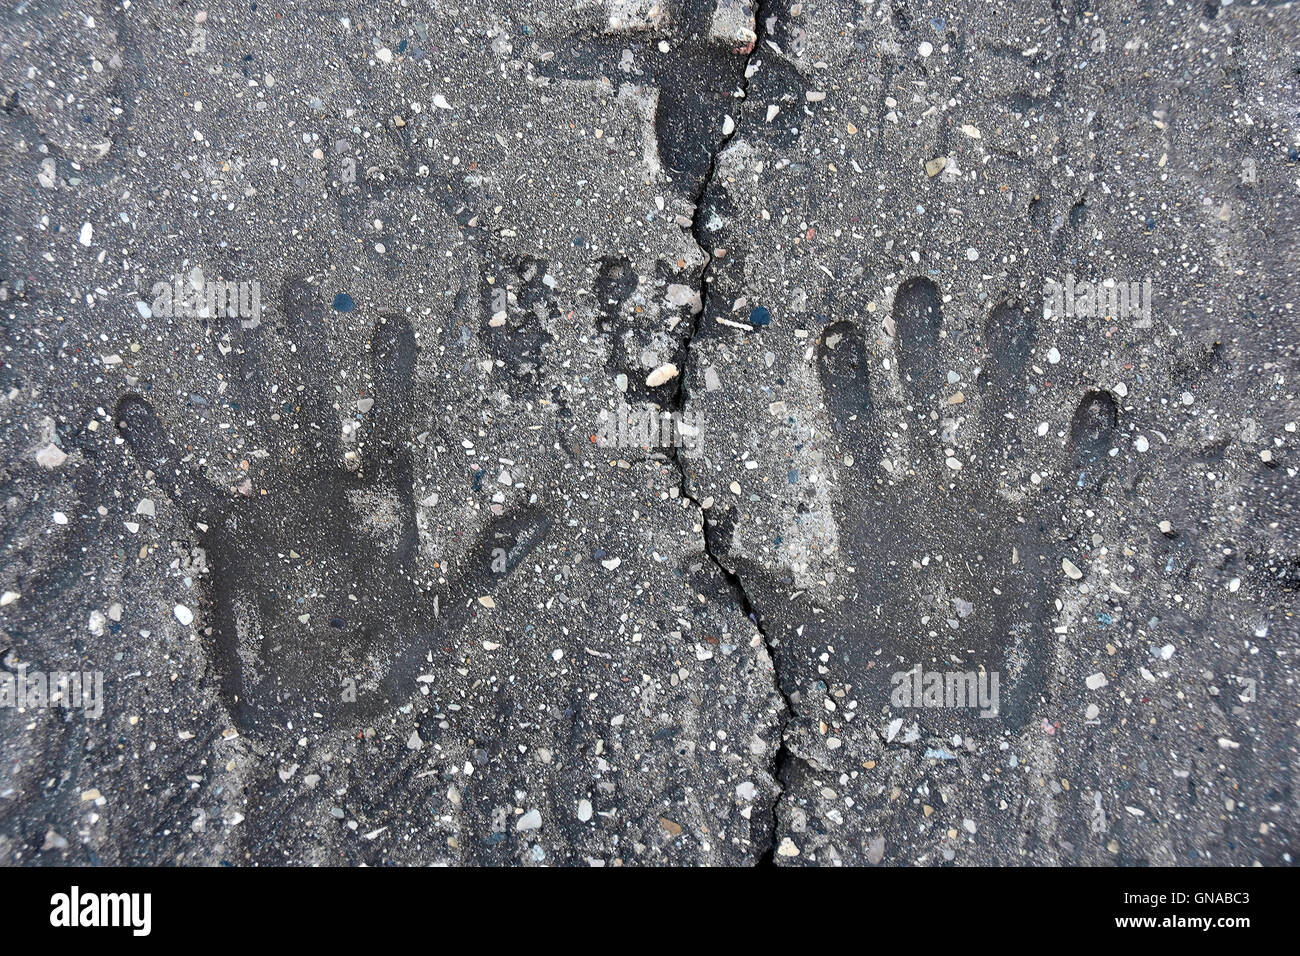 Pair of hand print indentations in concrete Stock Photo